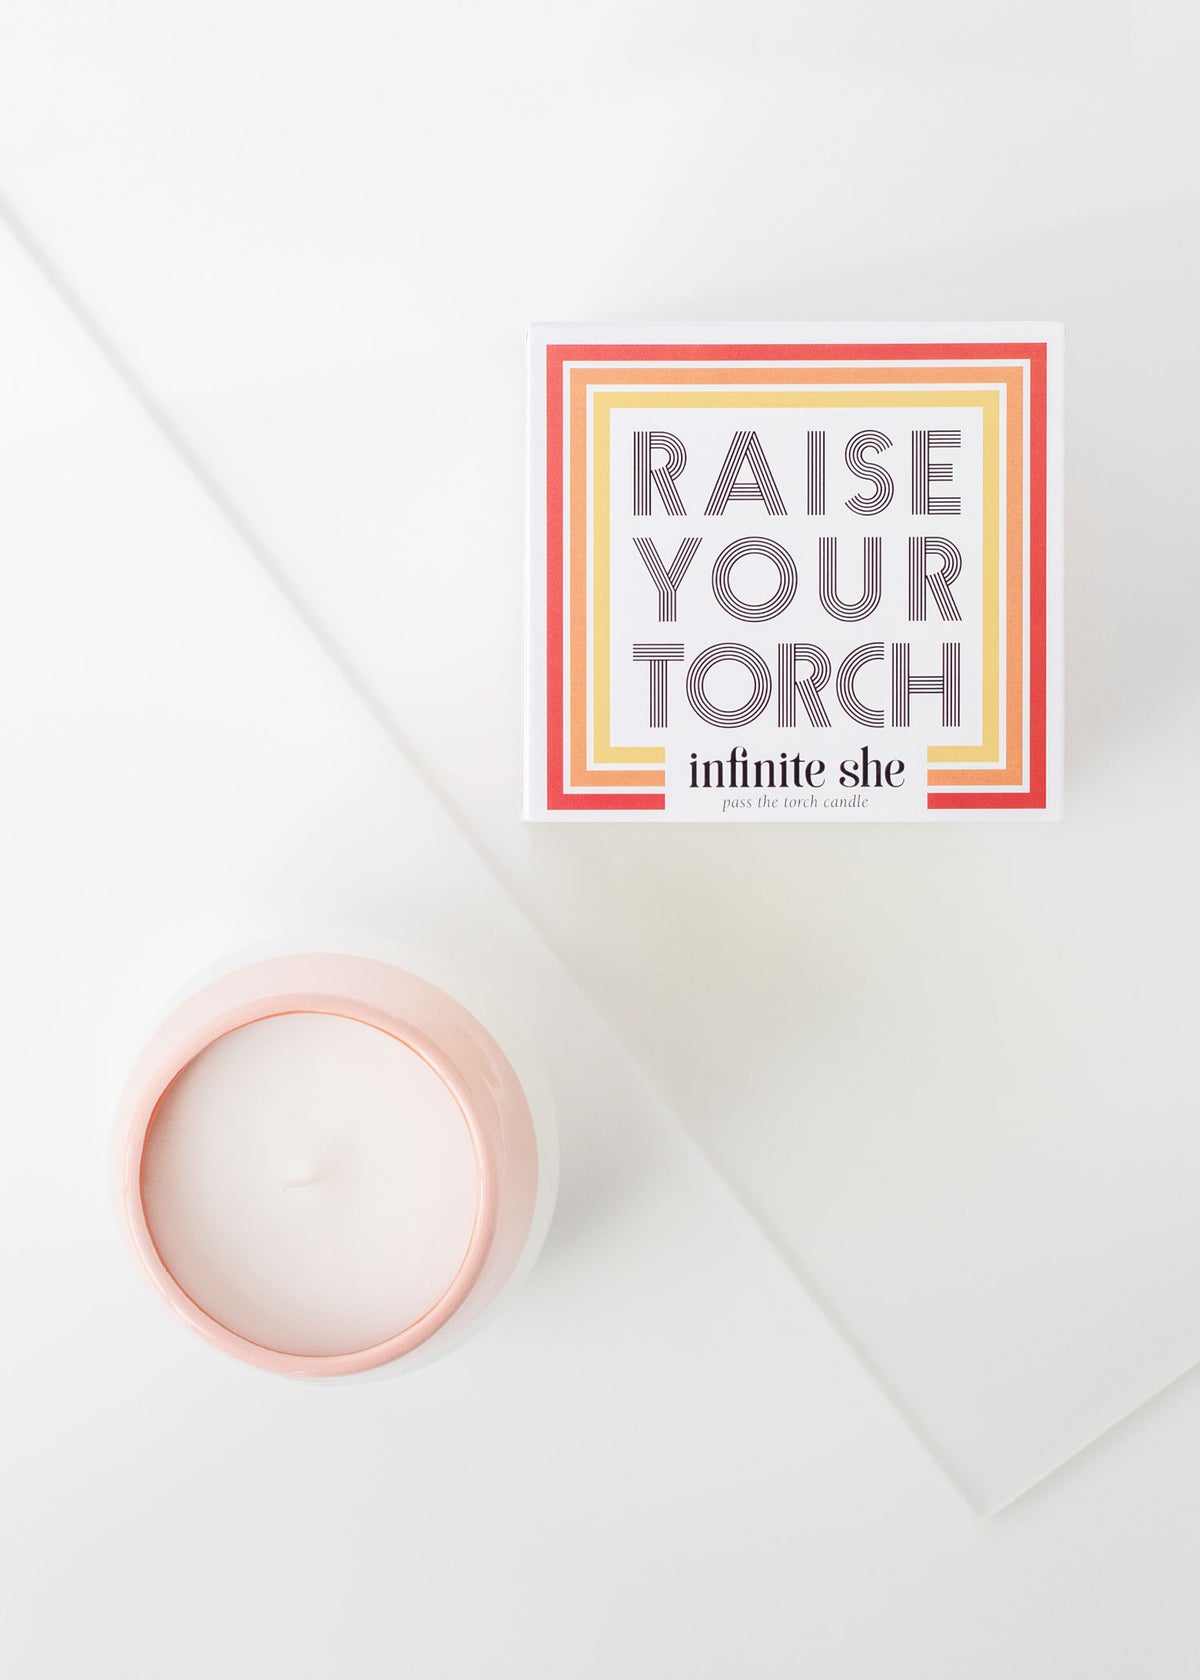 A book titled "Raise Your Torch" by Infinite She lies next to a Margot Elena Infinite She Raise Your Torch Ceramic Candle infused with sandalwood on a white surface, illuminated by natural light from the left side.